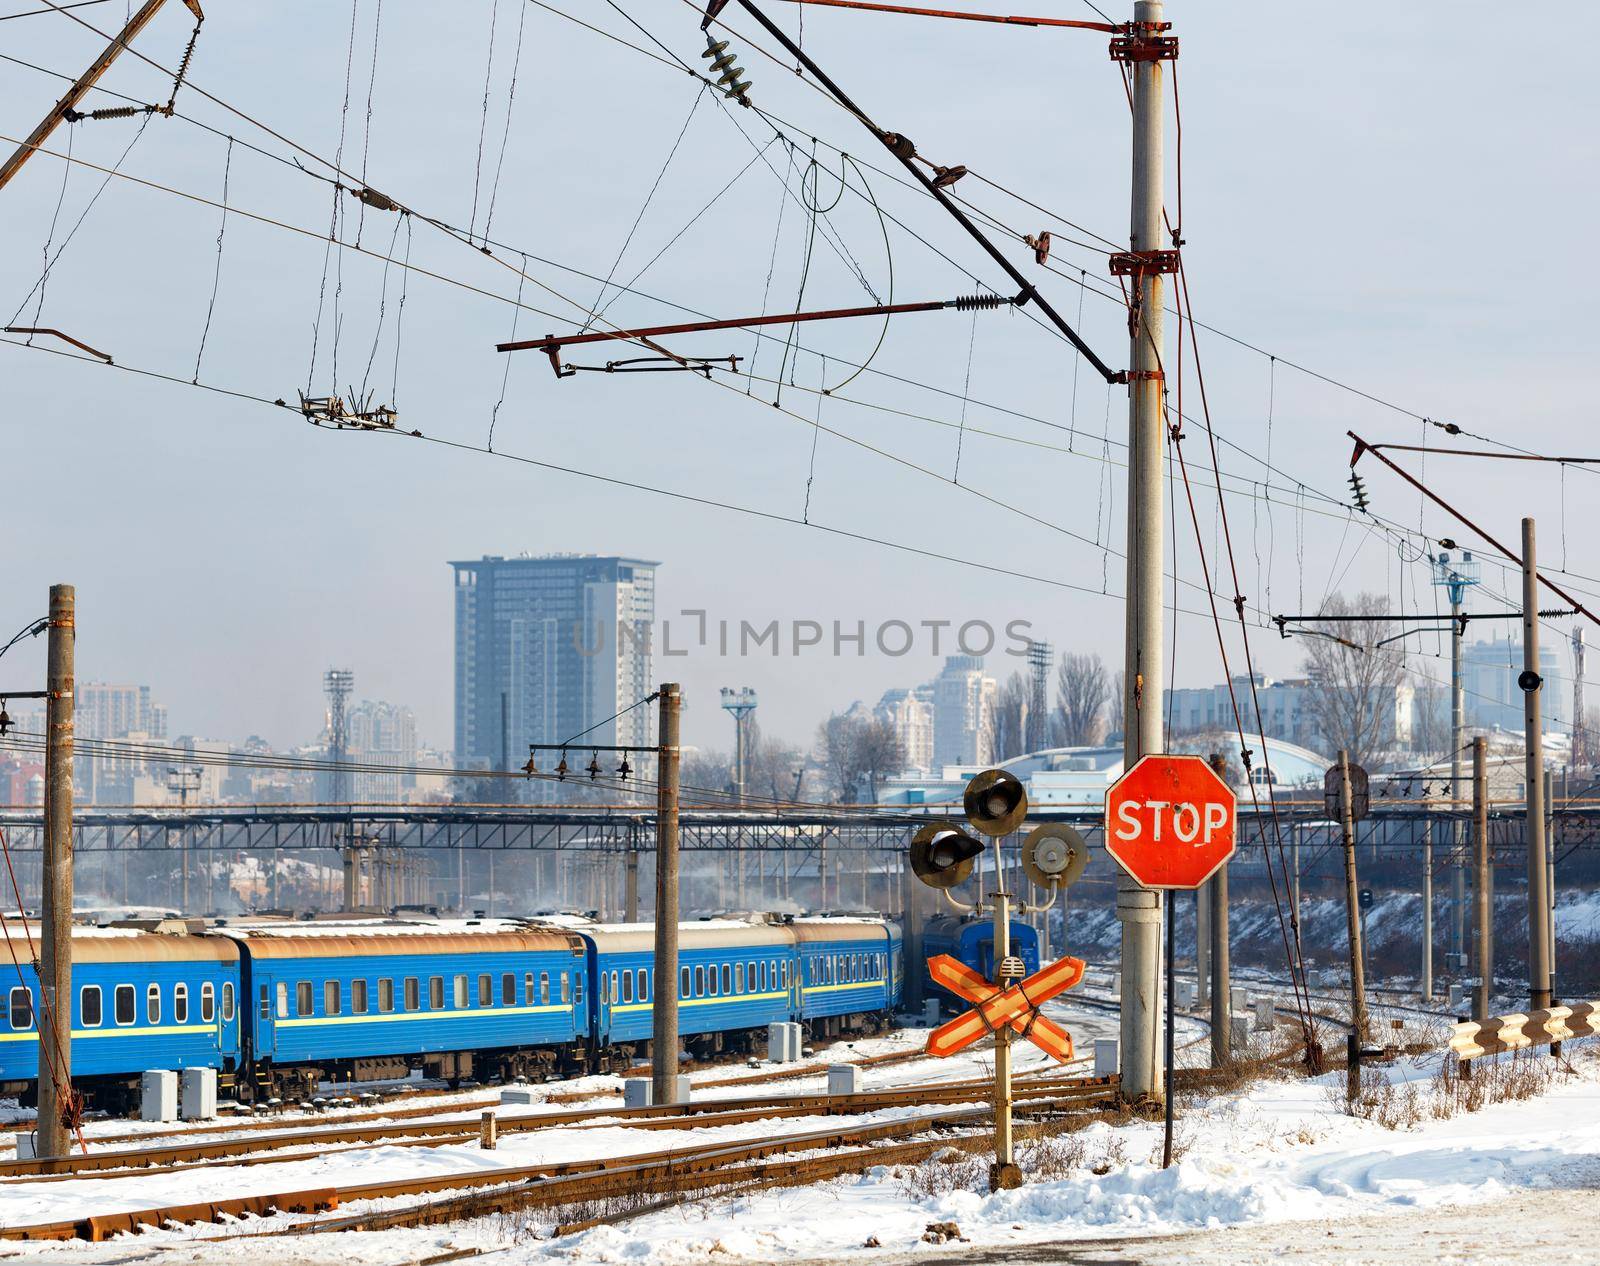 Red stop sign at the railway crossing against the background of the railway station and buildings of the winter city. by Sergii